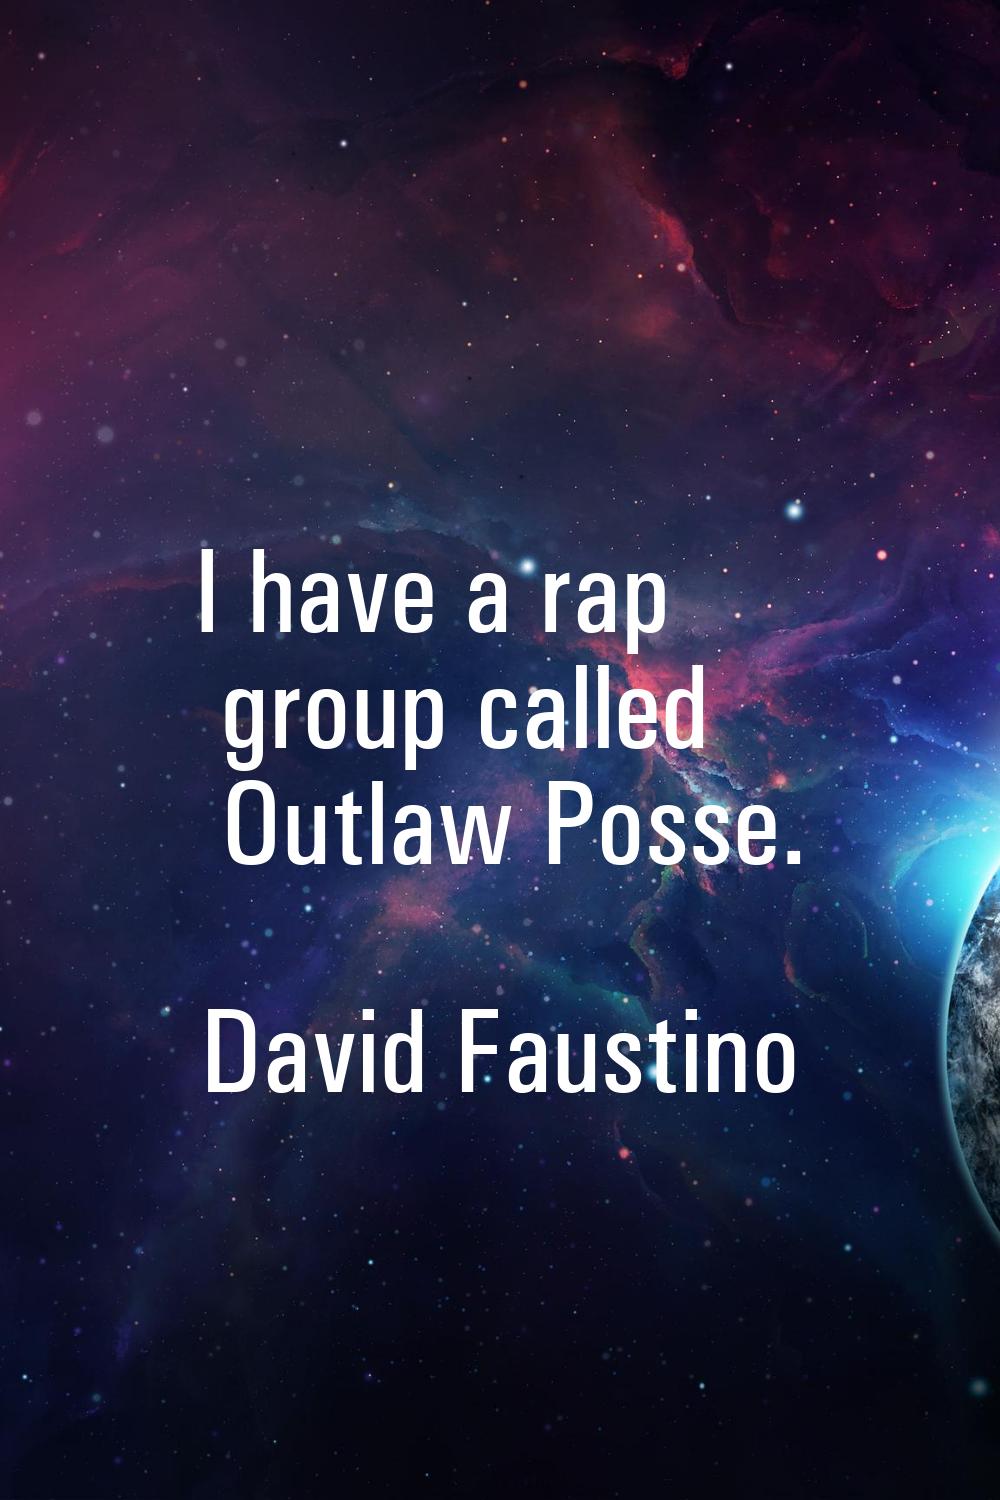 I have a rap group called Outlaw Posse.